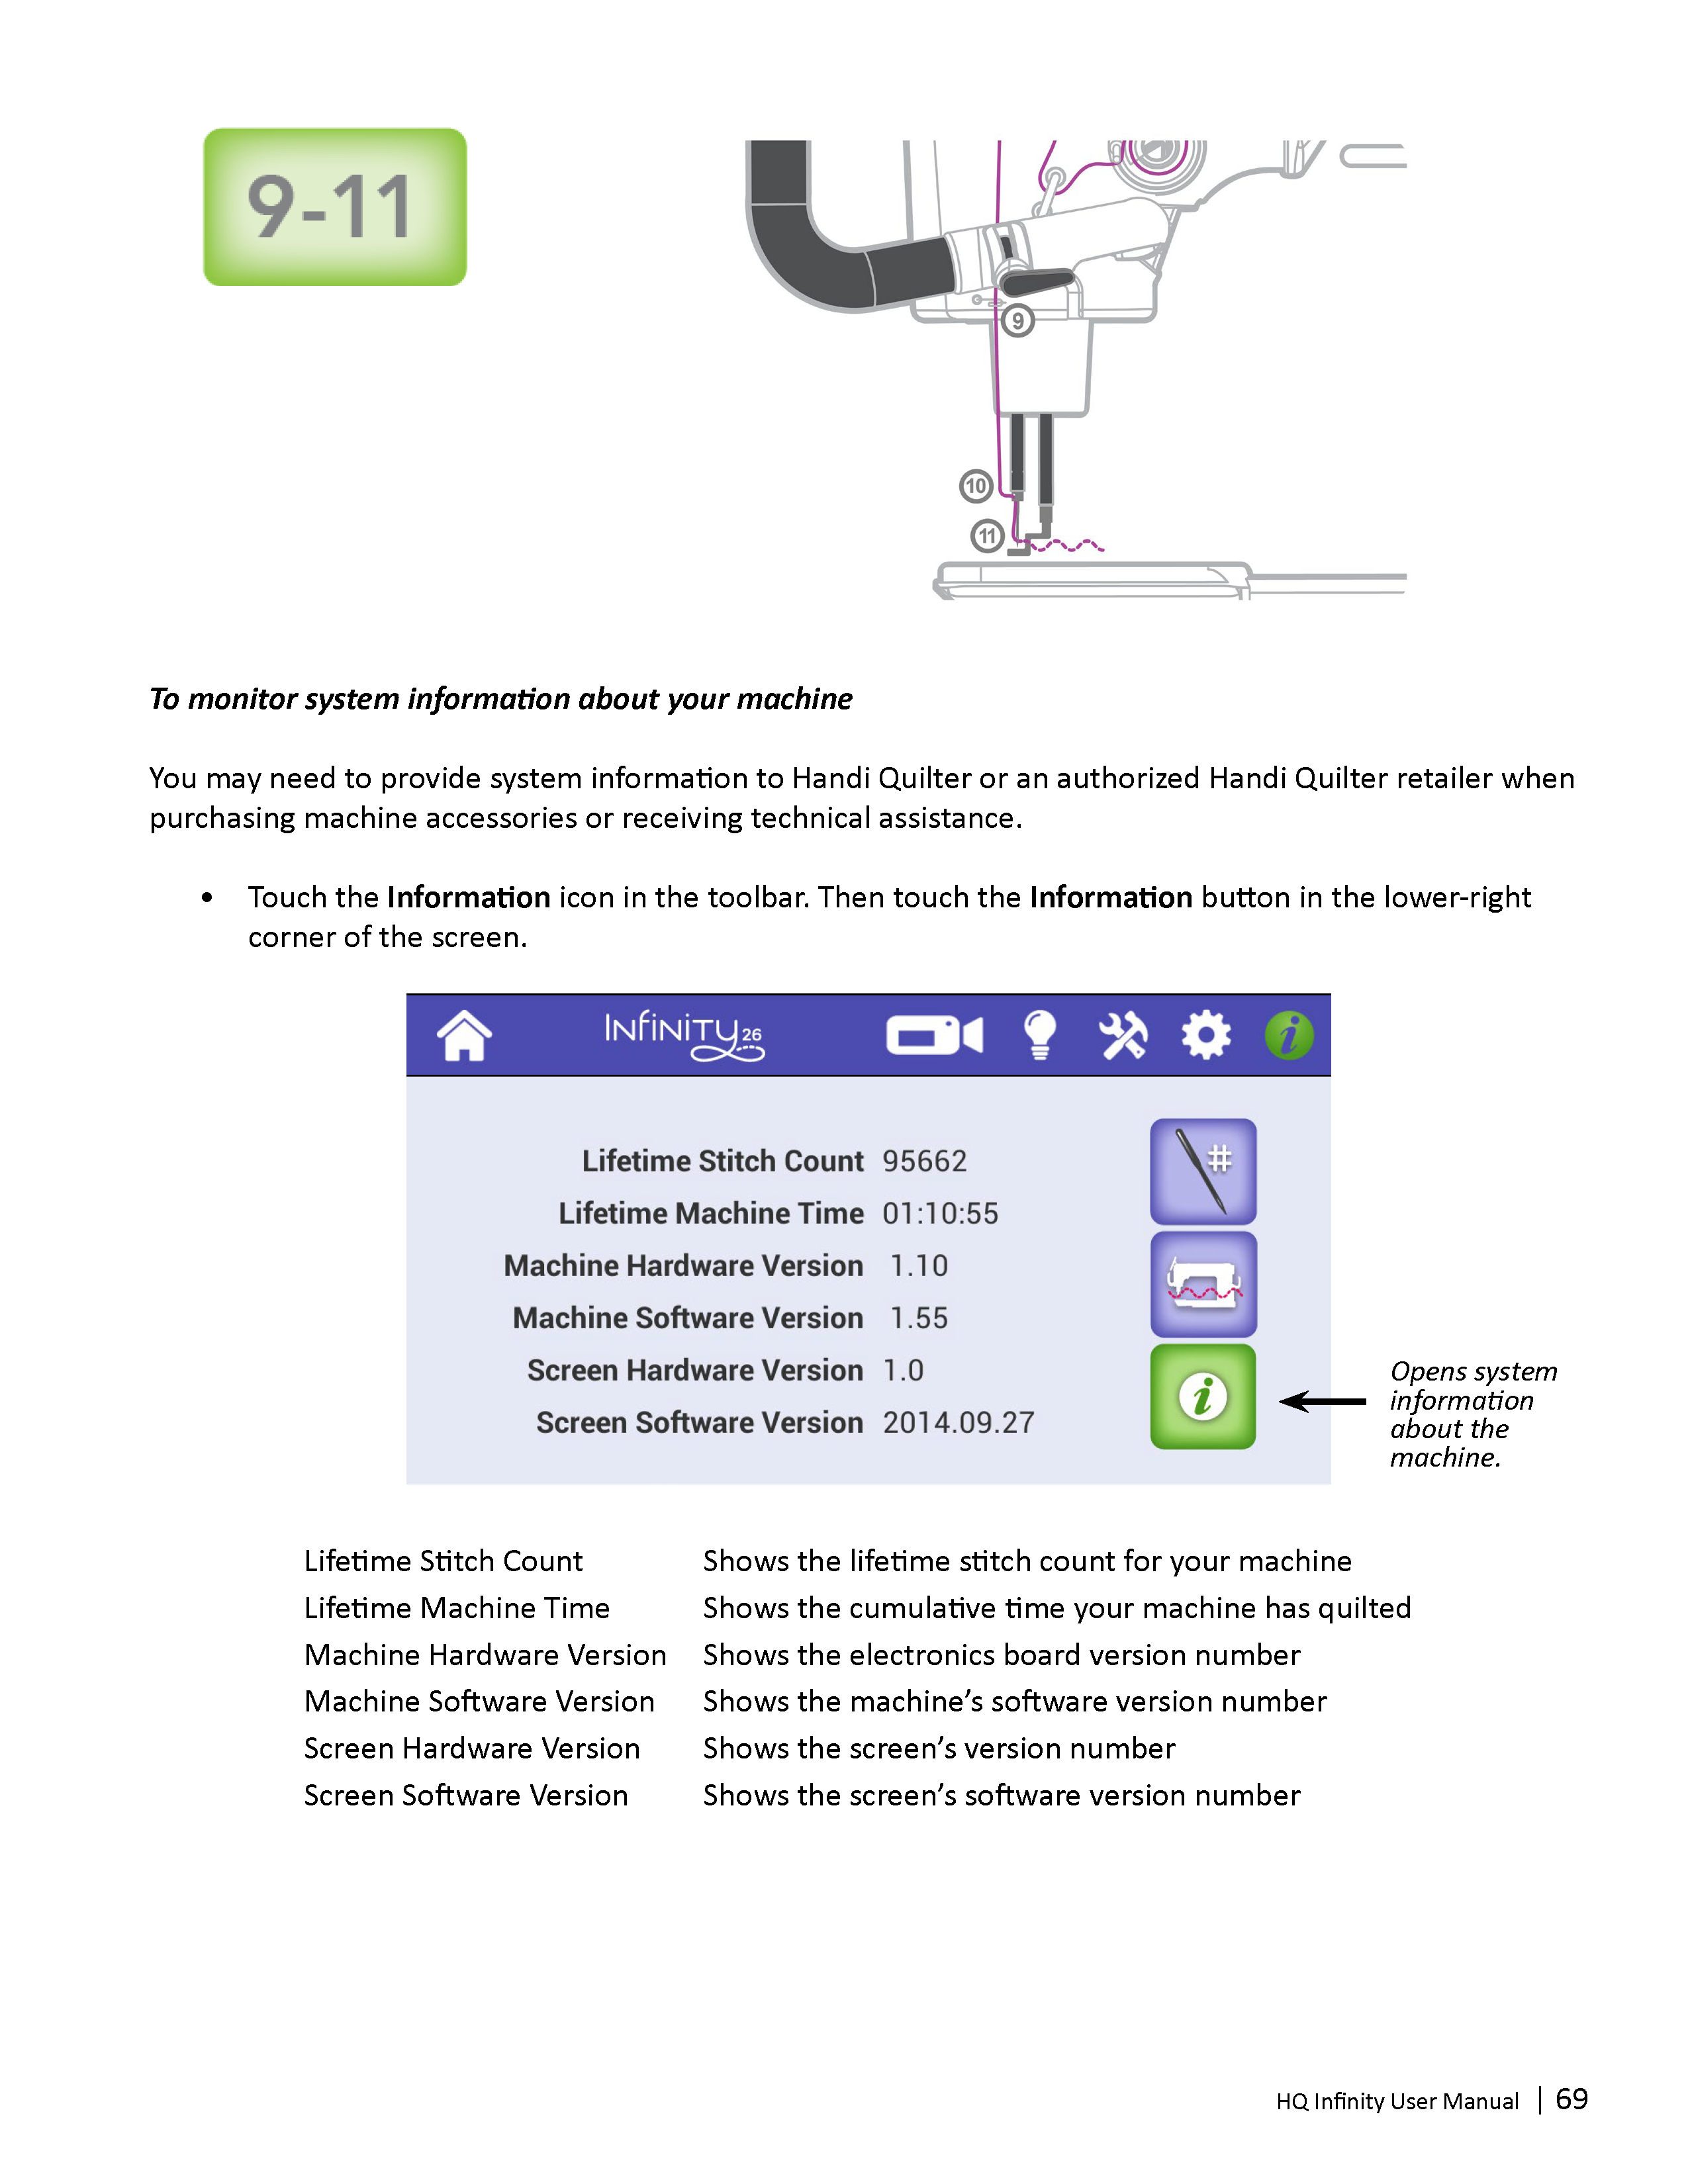 QM33001-HQ-Infinity-User-manual-version-1.4-ALL-Web-1_Page_70.png